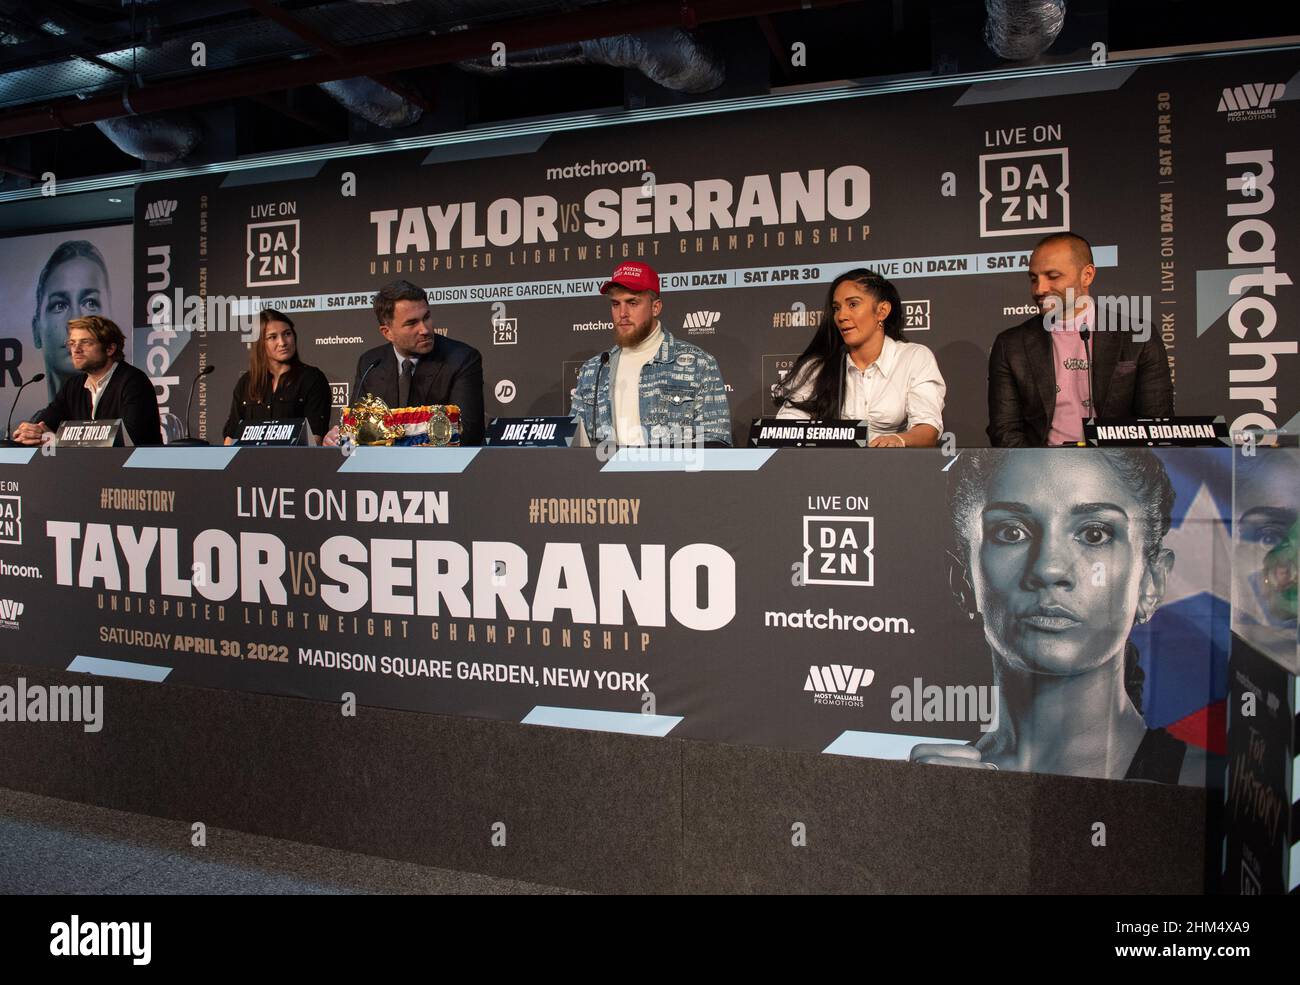 (left) to (right) Joseph Markowski EVP, DAZN, Katie Taylor undisputed World Lightweight champion, Eddie Hearn chairman, Matchroom Sport, Jake Paul co-founder of Most Valuable Promotions, professional boxer and content creator, Amanda Serrano seven-weight World champion and Nakisa Bidarian co-founder of Most Valuable Promotions during the press conference ahead of the Katie Taylor v Amanda Serrano fight at Madison Square Gardens in April 2022, at Landing Forty Two, The Leadenhall Building, England on the 7 February 2022. Photo by Alan Stanford. Stock Photo